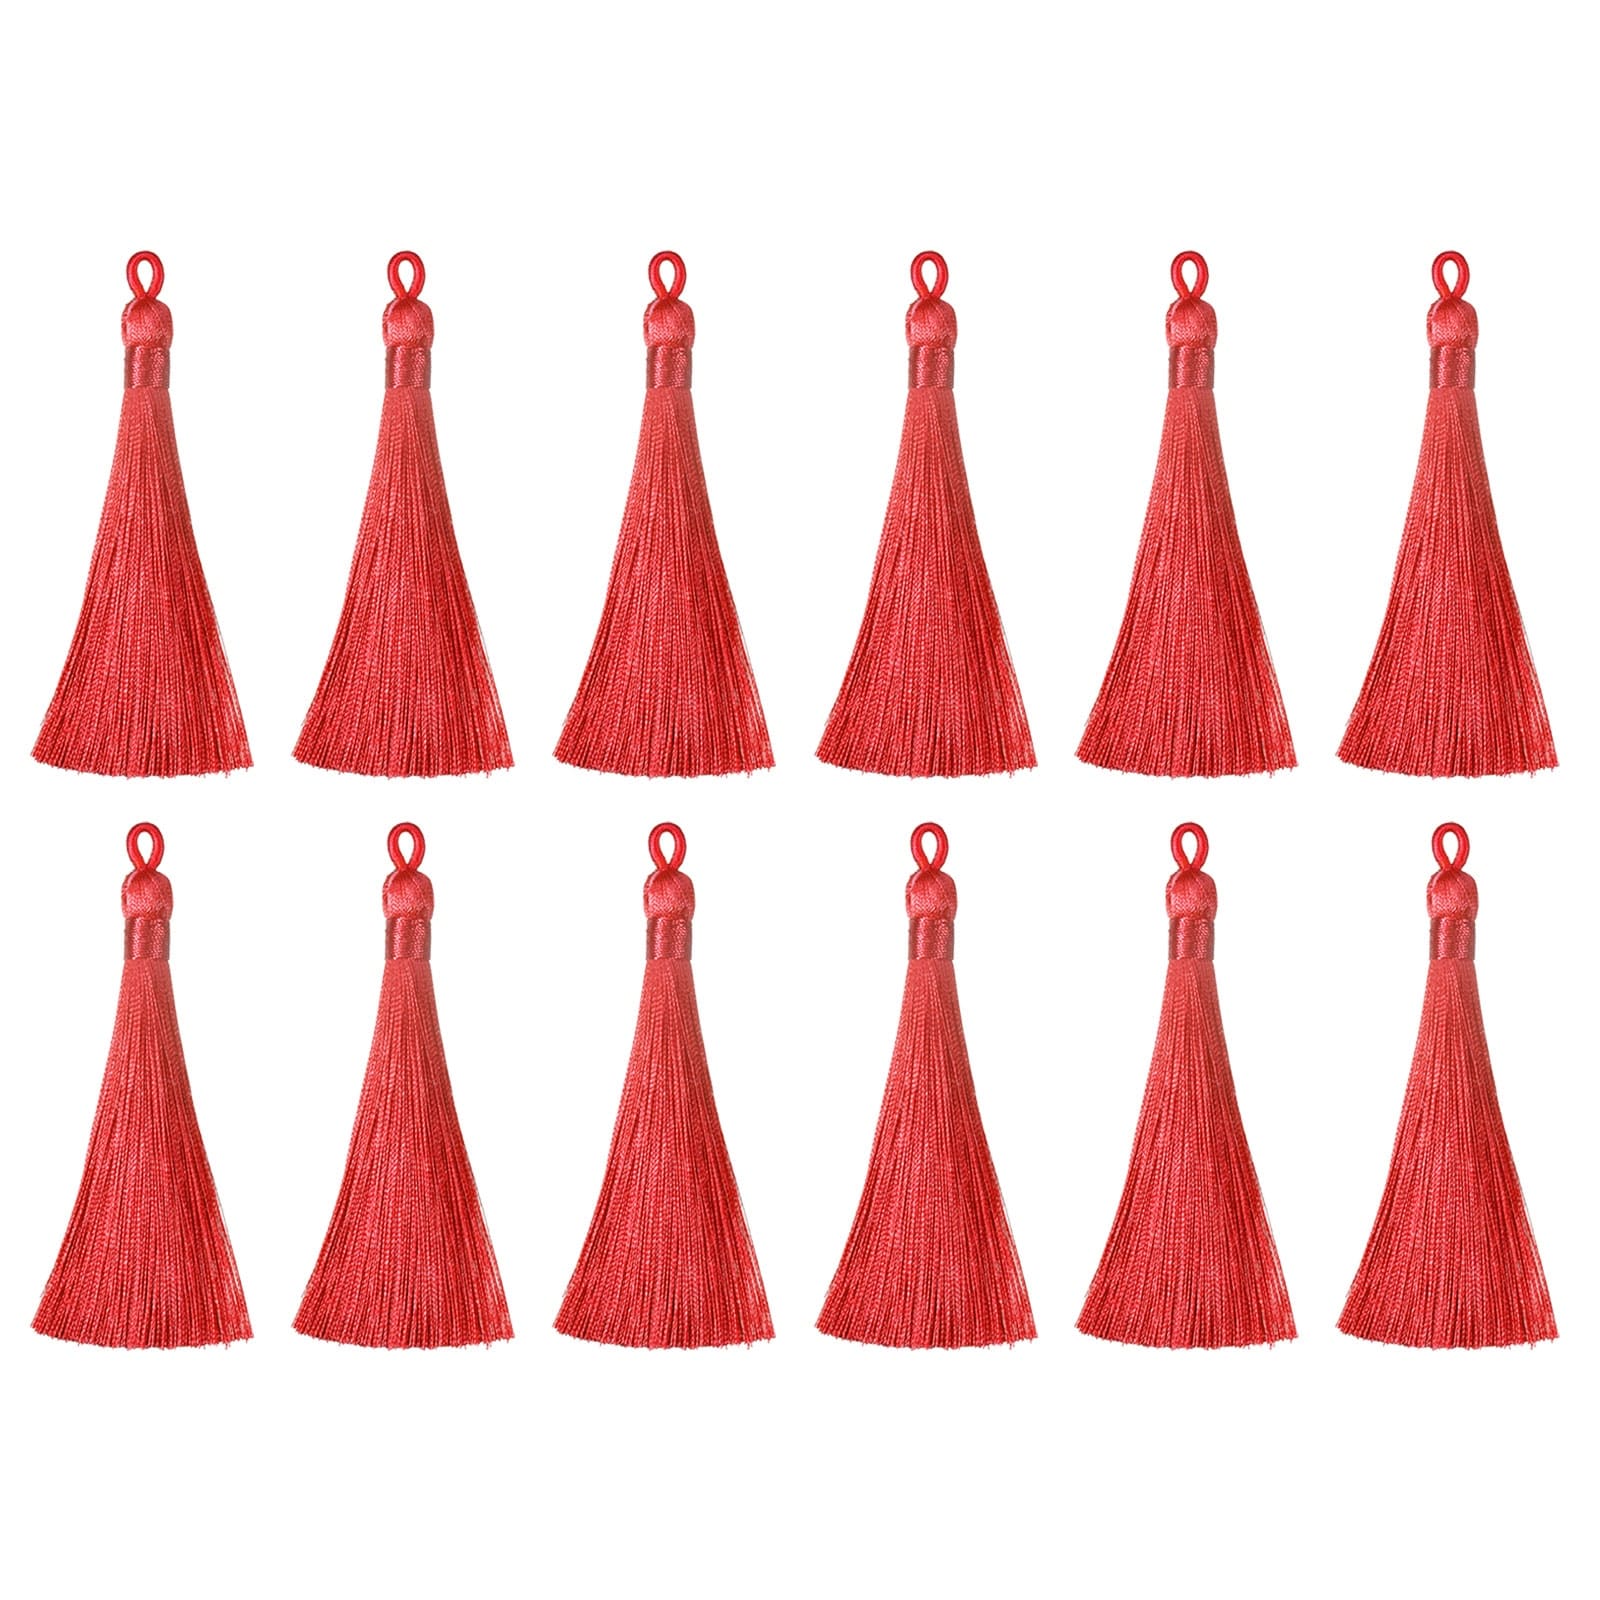 6.5 Silky Bookmark Tassels with Loop for DIY Craft Accessory, 20pcs Wheat